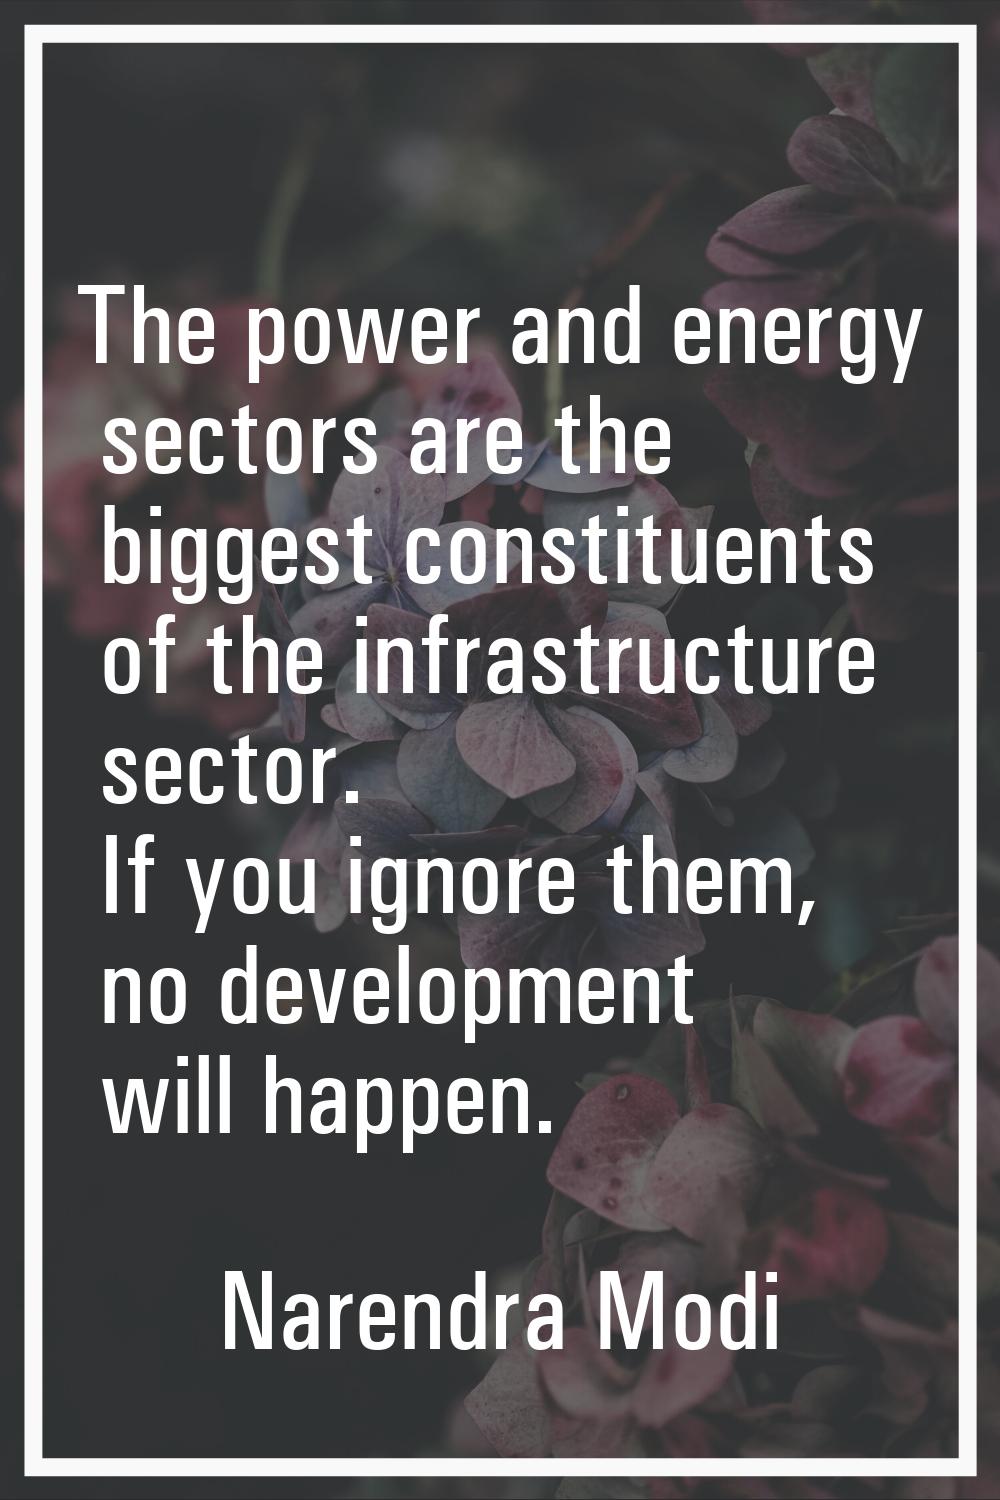 The power and energy sectors are the biggest constituents of the infrastructure sector. If you igno